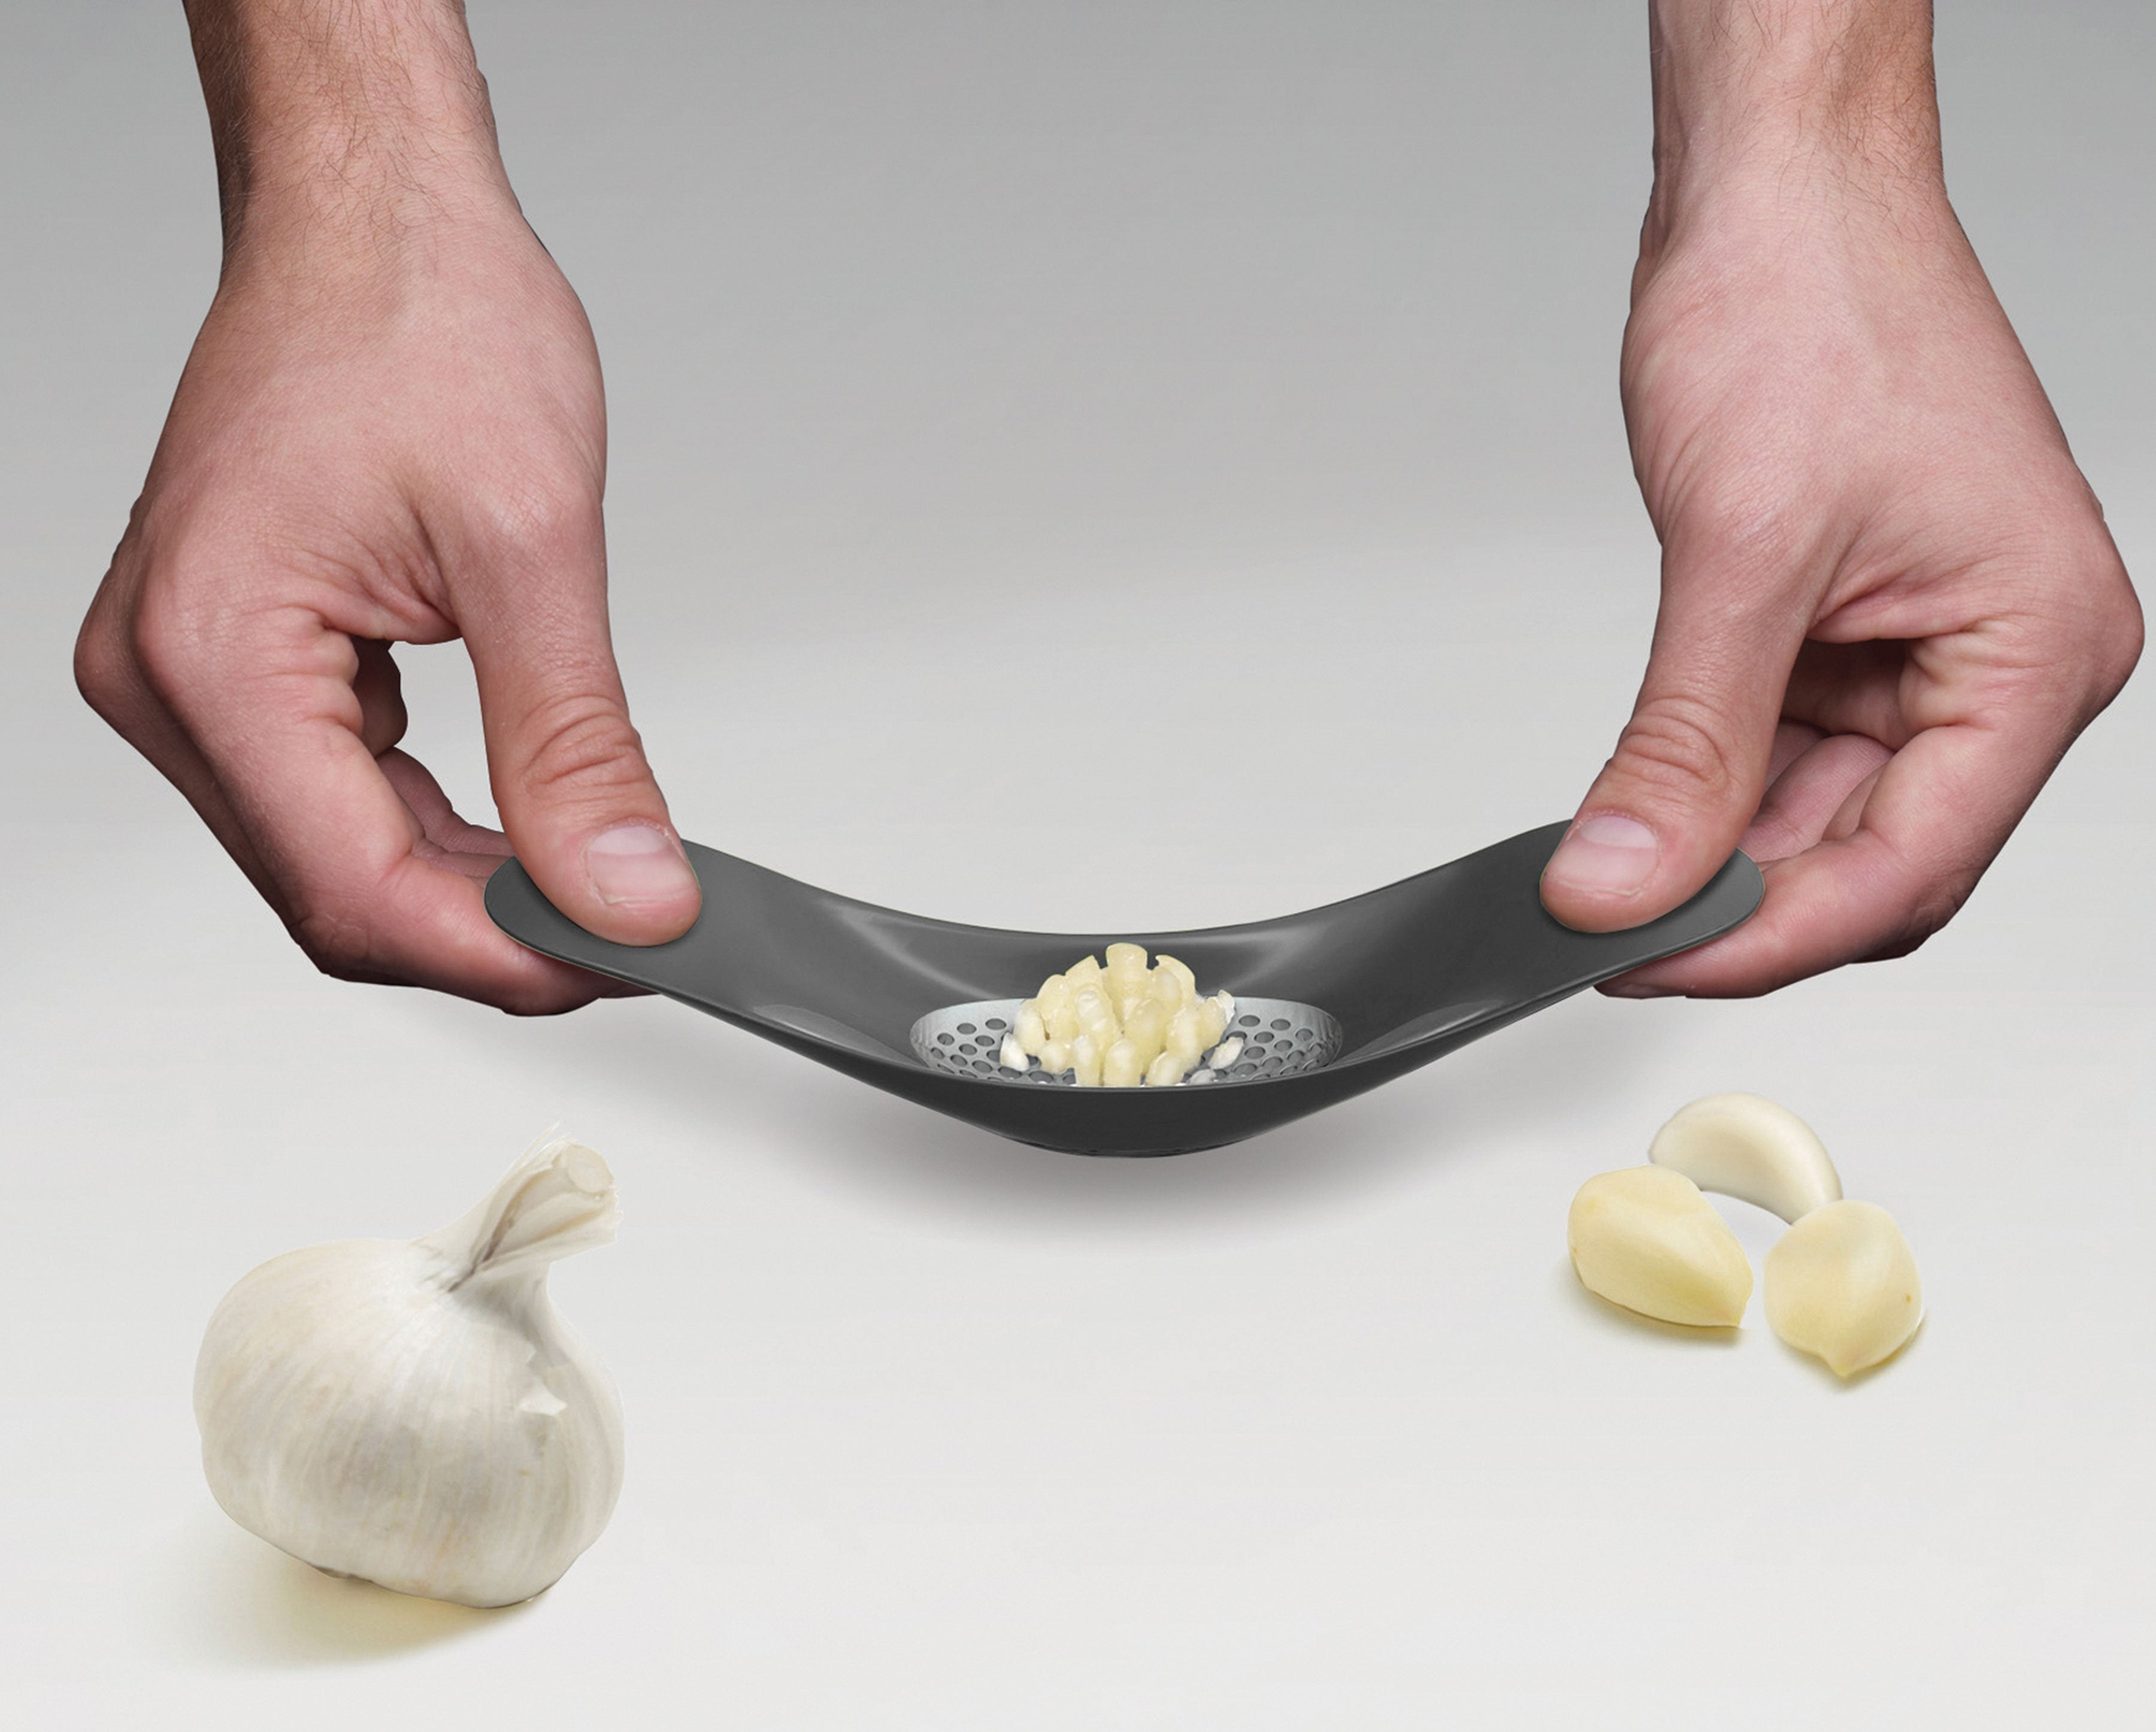 BEON.COM.AU  By using downward pressure and a ‘rocking’ motion, this stylish tool crushes garlic cloves quickly and easily without leaving any garlic odour on your hands.  Crush garlic by pushing and rocking back and forth over cloves Crushed garlic collected in bowl shaped design Can easily be scooped into ... Joseph Joseph at BEON.COM.AU